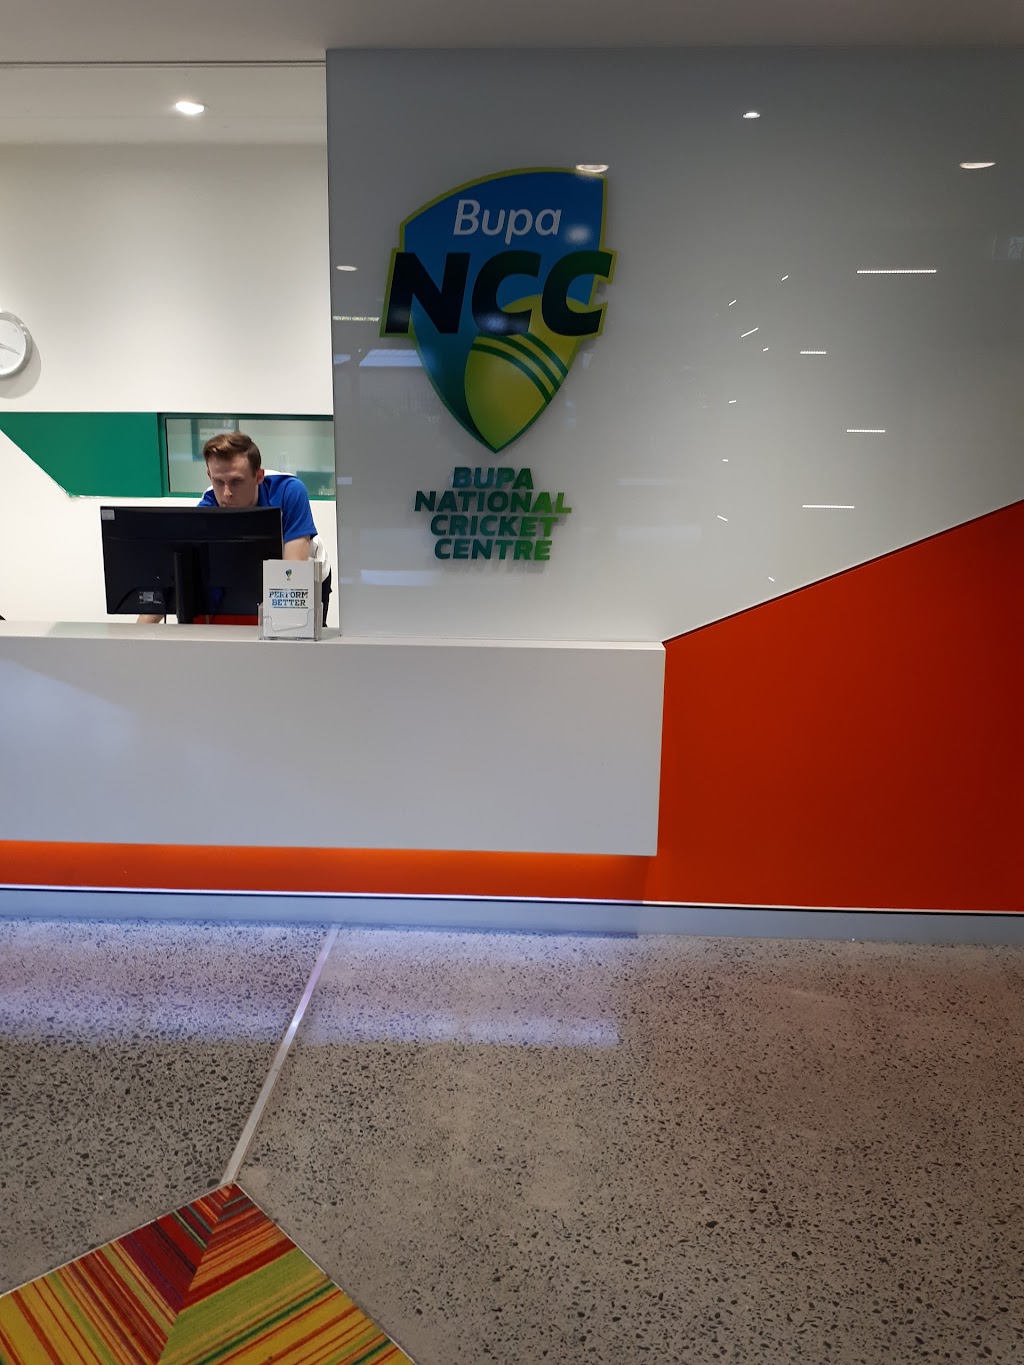 Bupa National Cricket Centre | 20 Greg Chappell St, Albion QLD 4010, Australia | Phone: (07) 3199 9300